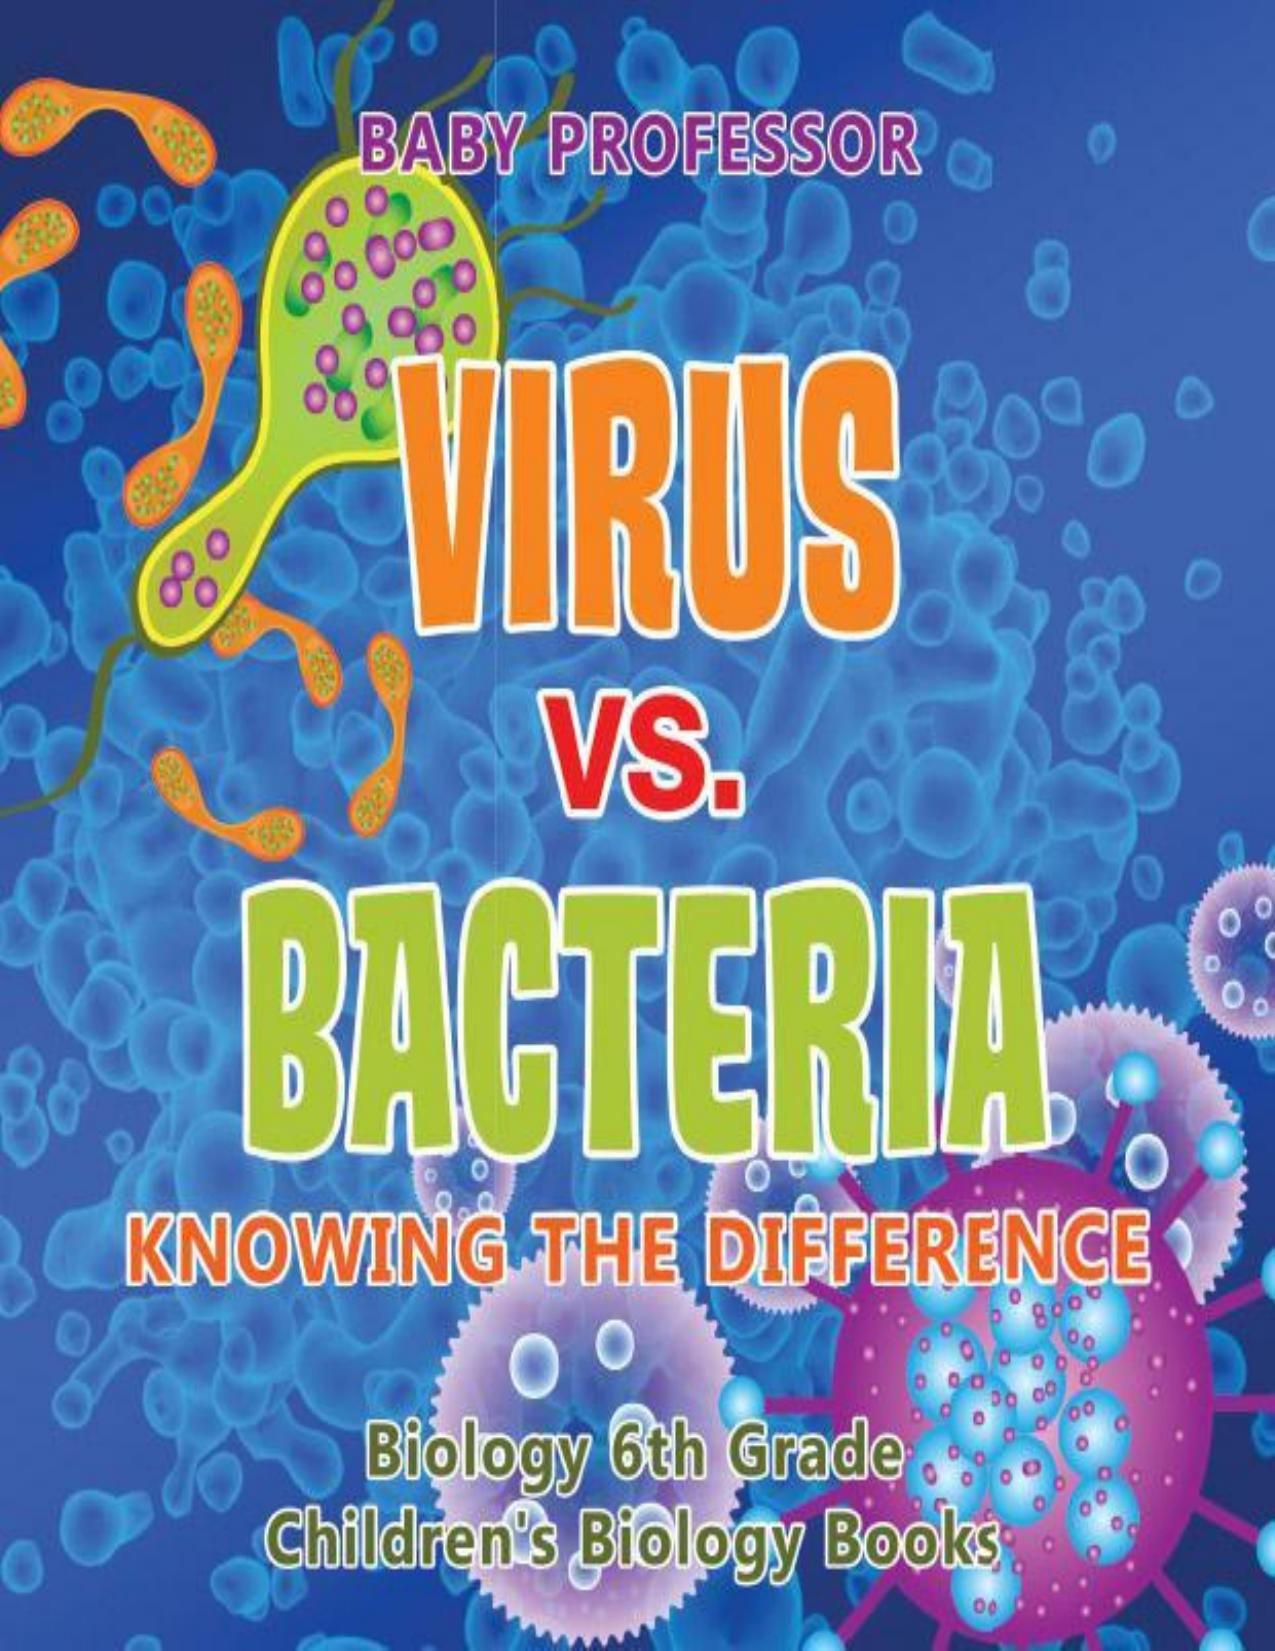 Virus vs. Bacteria : Knowing the Difference - Biology 6th Grade | Children's Biology Books by Baby Professor